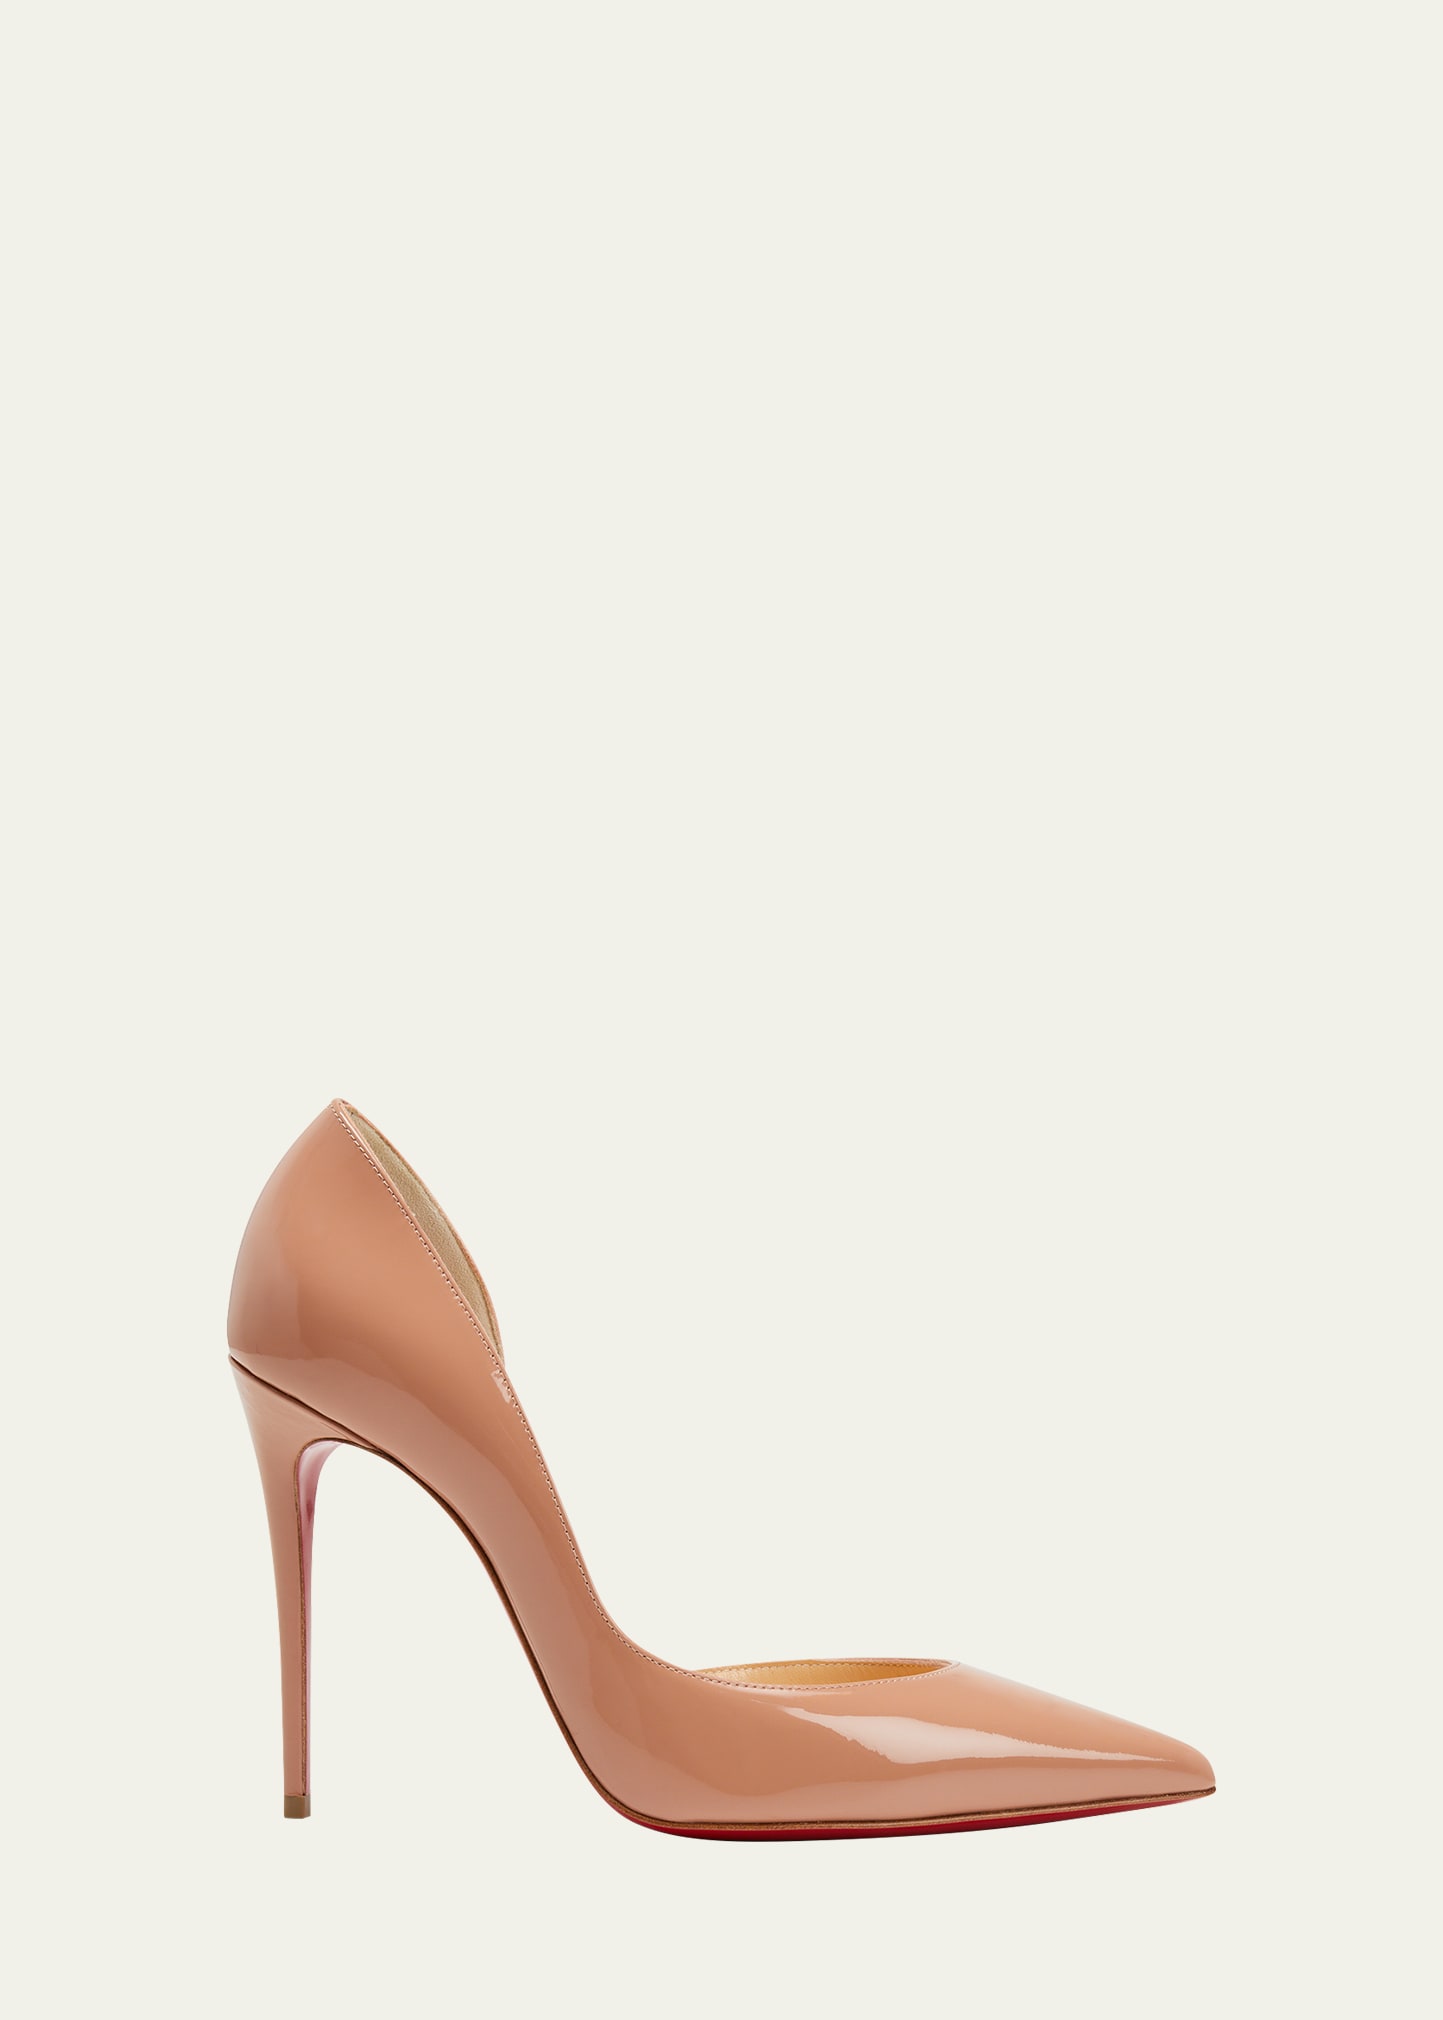 Christian Louboutin Iriza Patent 100mm Half-d'orsay Red Sole High-heel Pumps In Beige